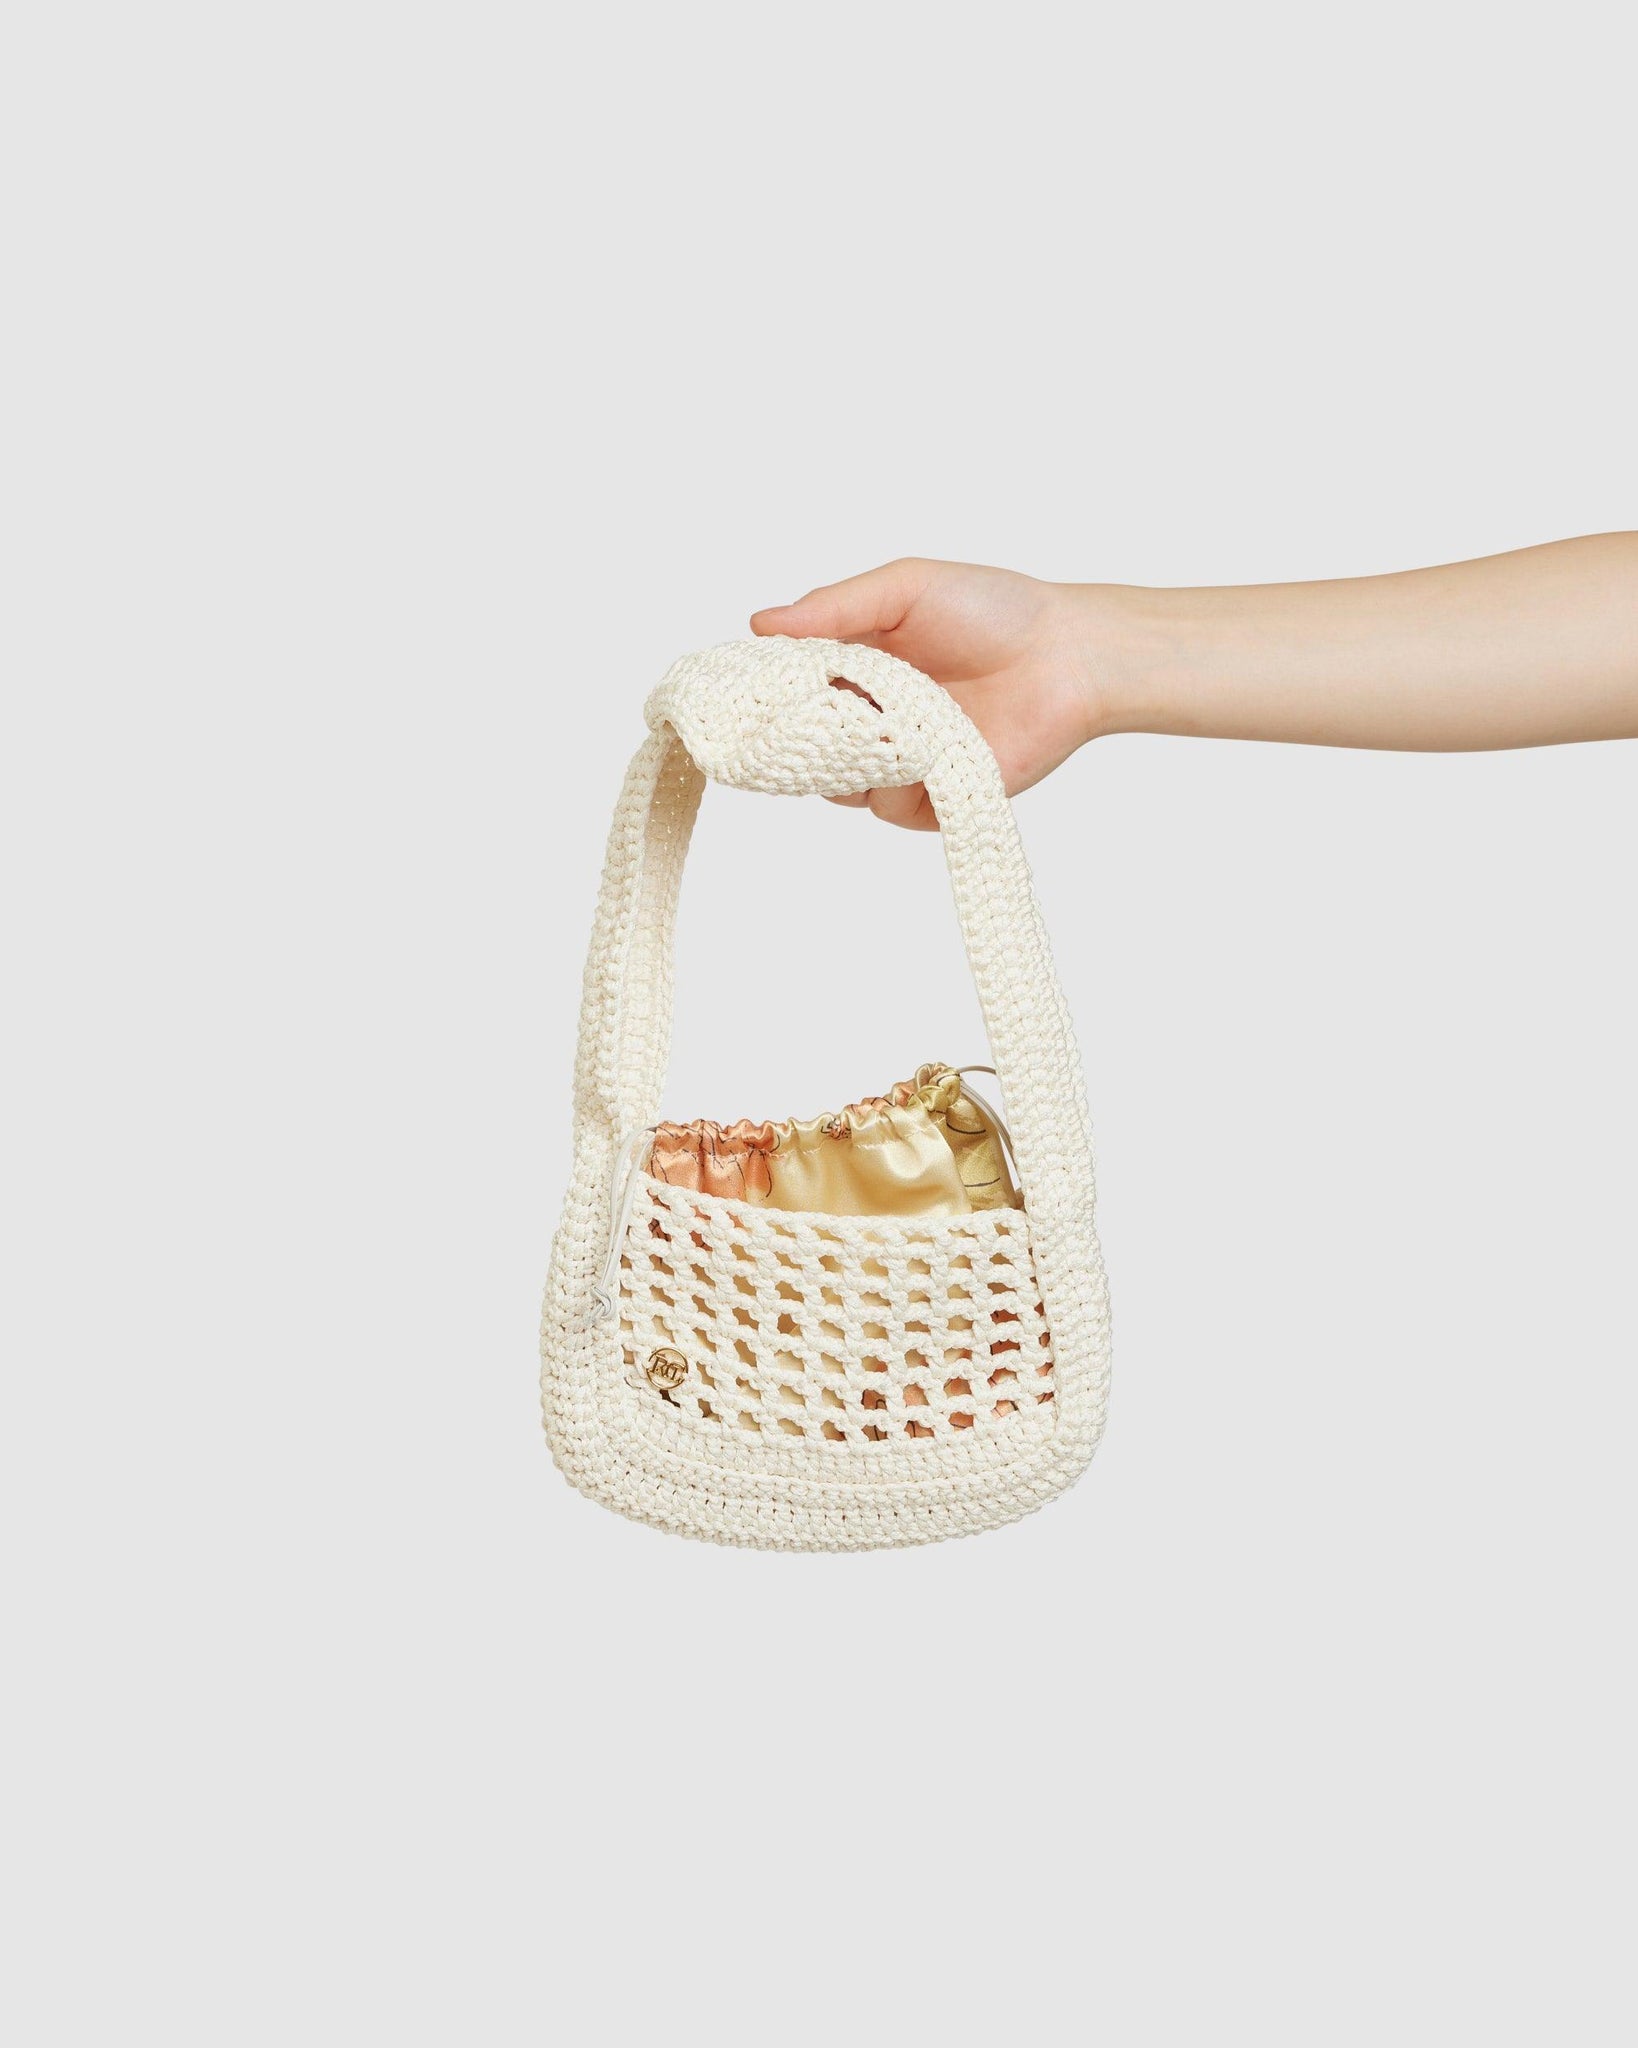 Monaco Hand Knit Fruit Bag - {{ collection.title }} - Chinatown Country Club 